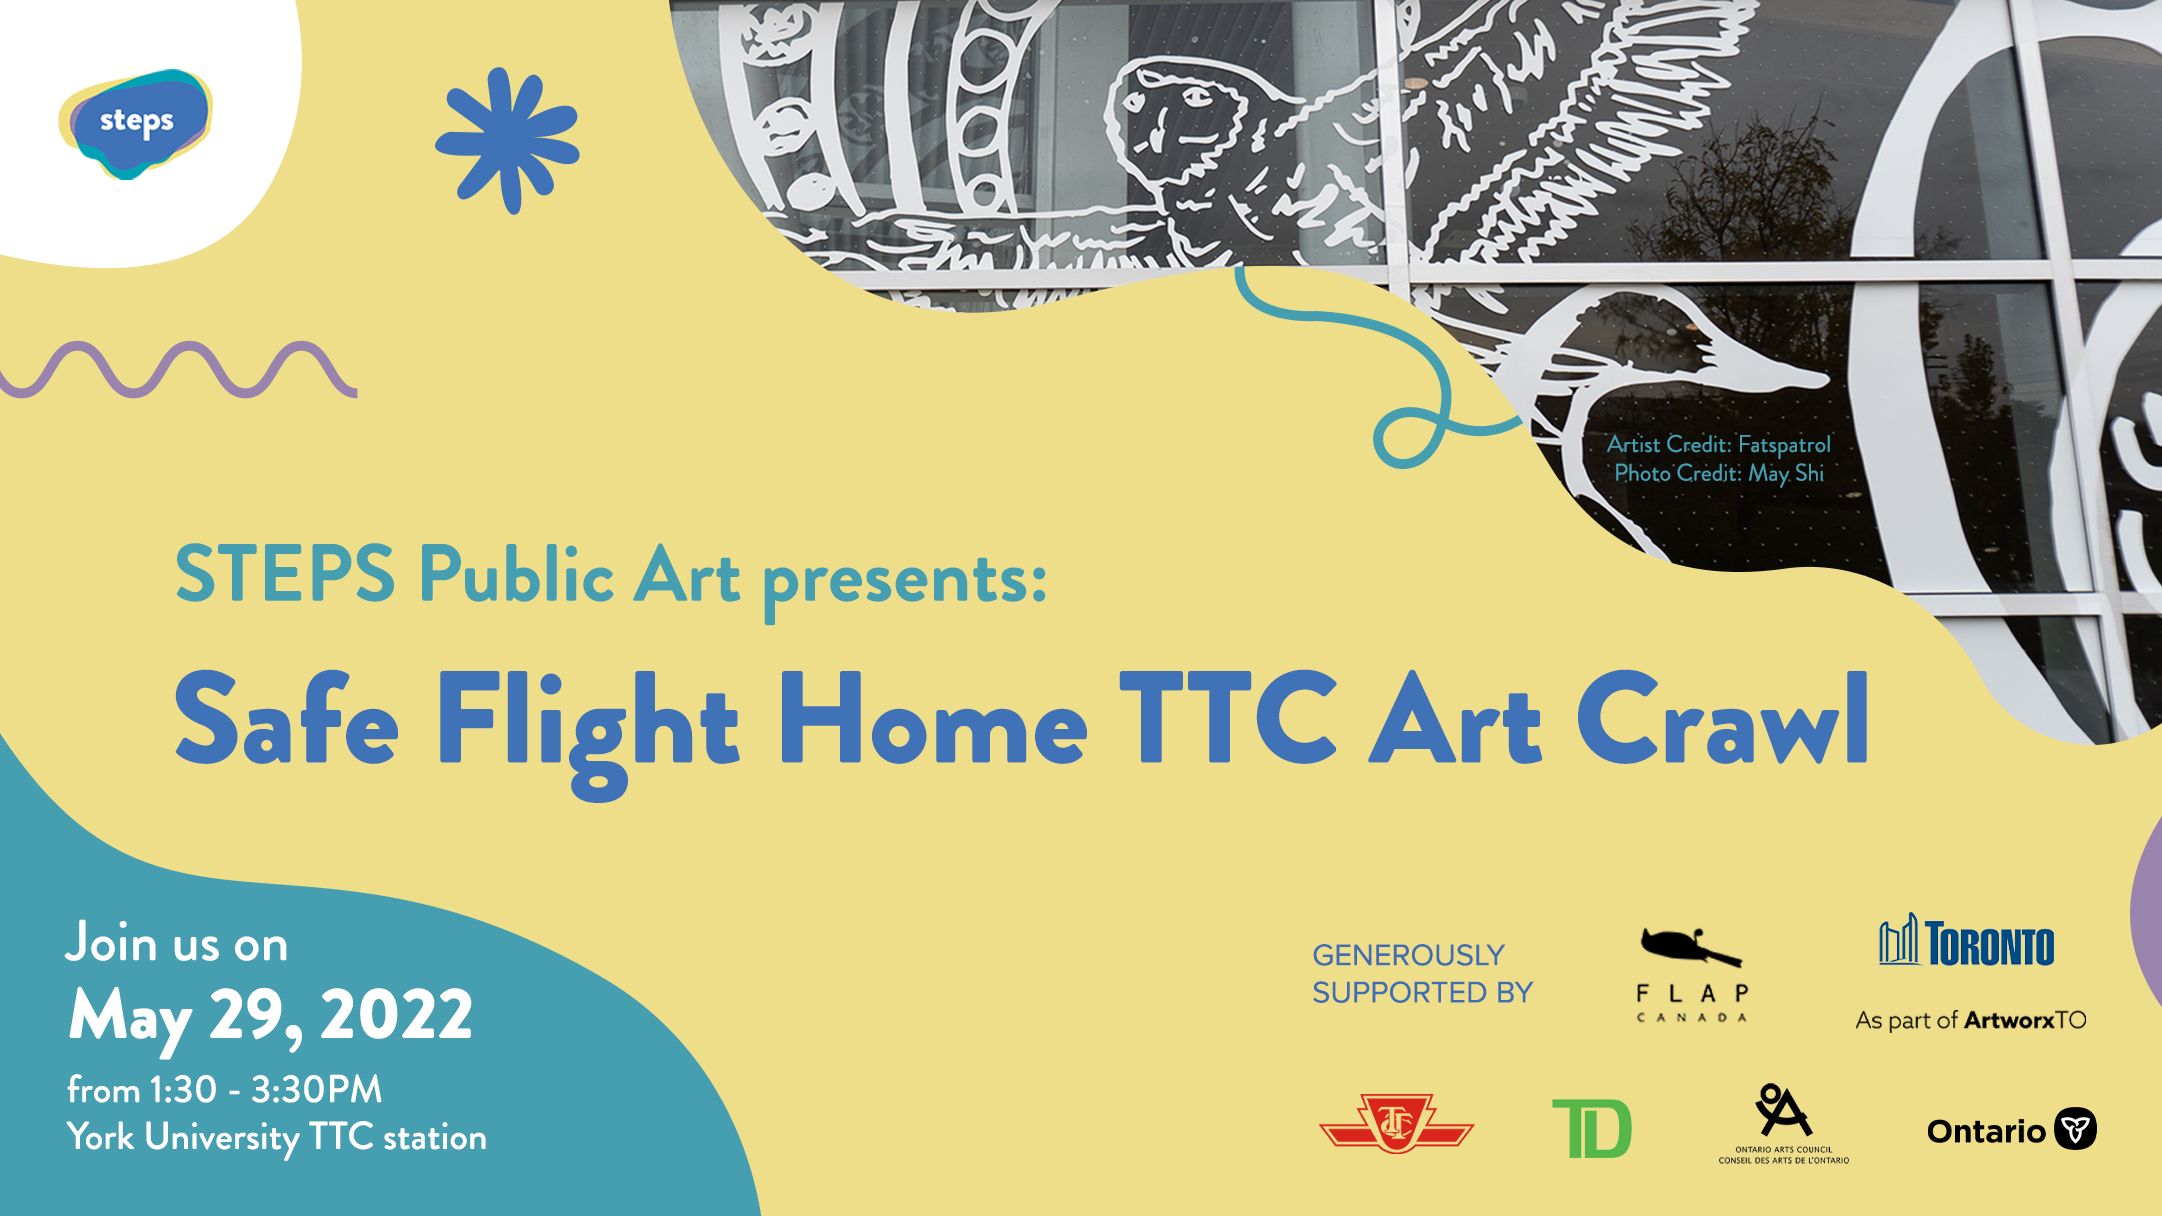 A rectangular graphic that features a glimpse of bird window vinyl murals in the top right corner. In the centre is a yellow wavy shape with the STEPS and funder logos and text that reads “STEPS Public Art presents: Safe Flight Home TTC Art Crawl.” In the bottom left corner is a teal shape with white text the reads “Join us on May 29, 2022 from 1:30 - 3:30 PM. York University TTC station.” 